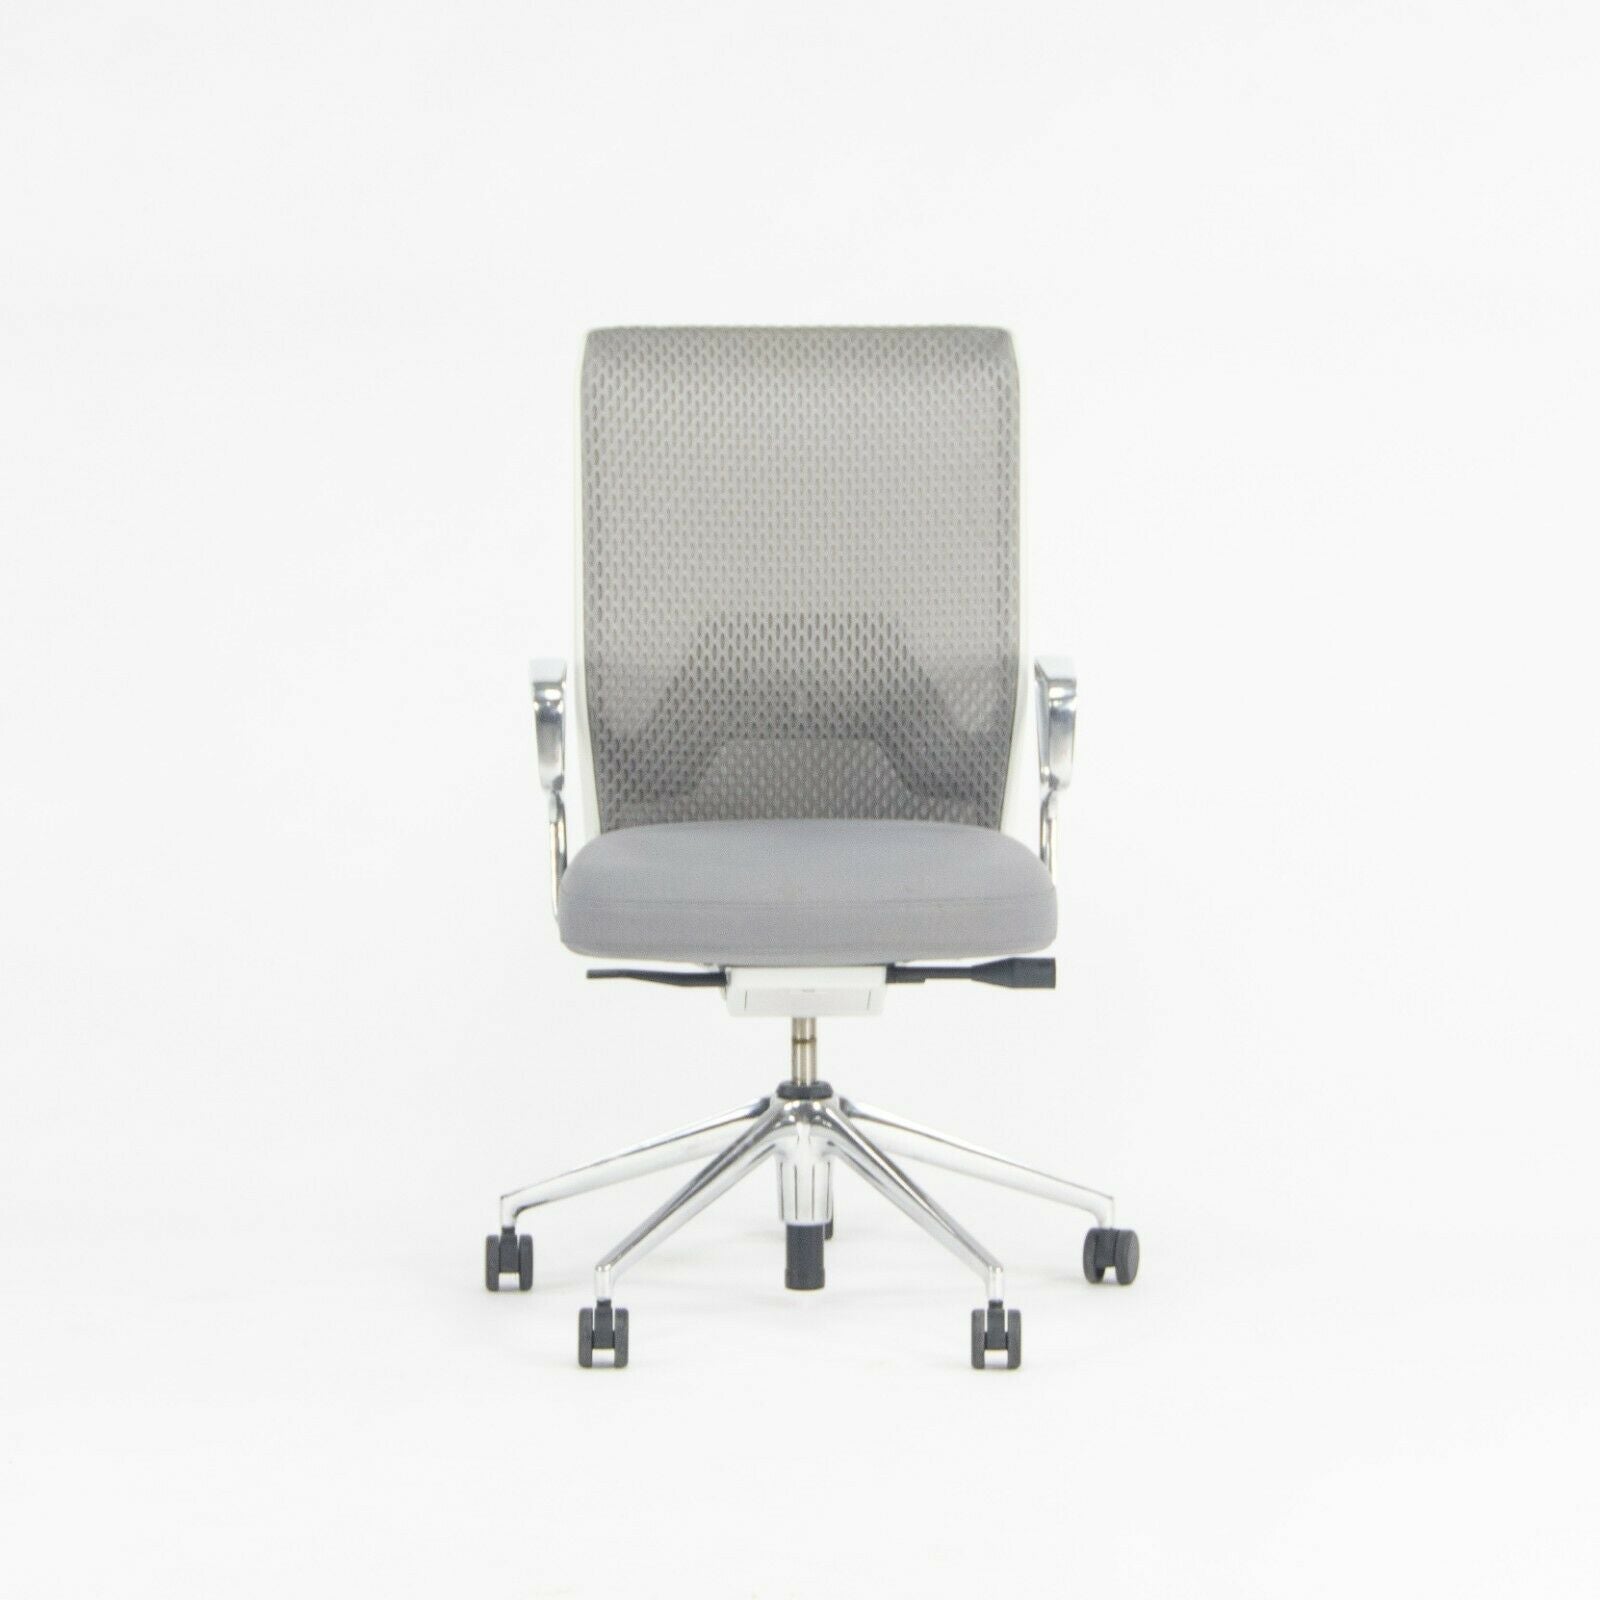 2015 Gray Vitra ID Mesh Desk Chairs by Antonio Citterio Polished Arms / Bases